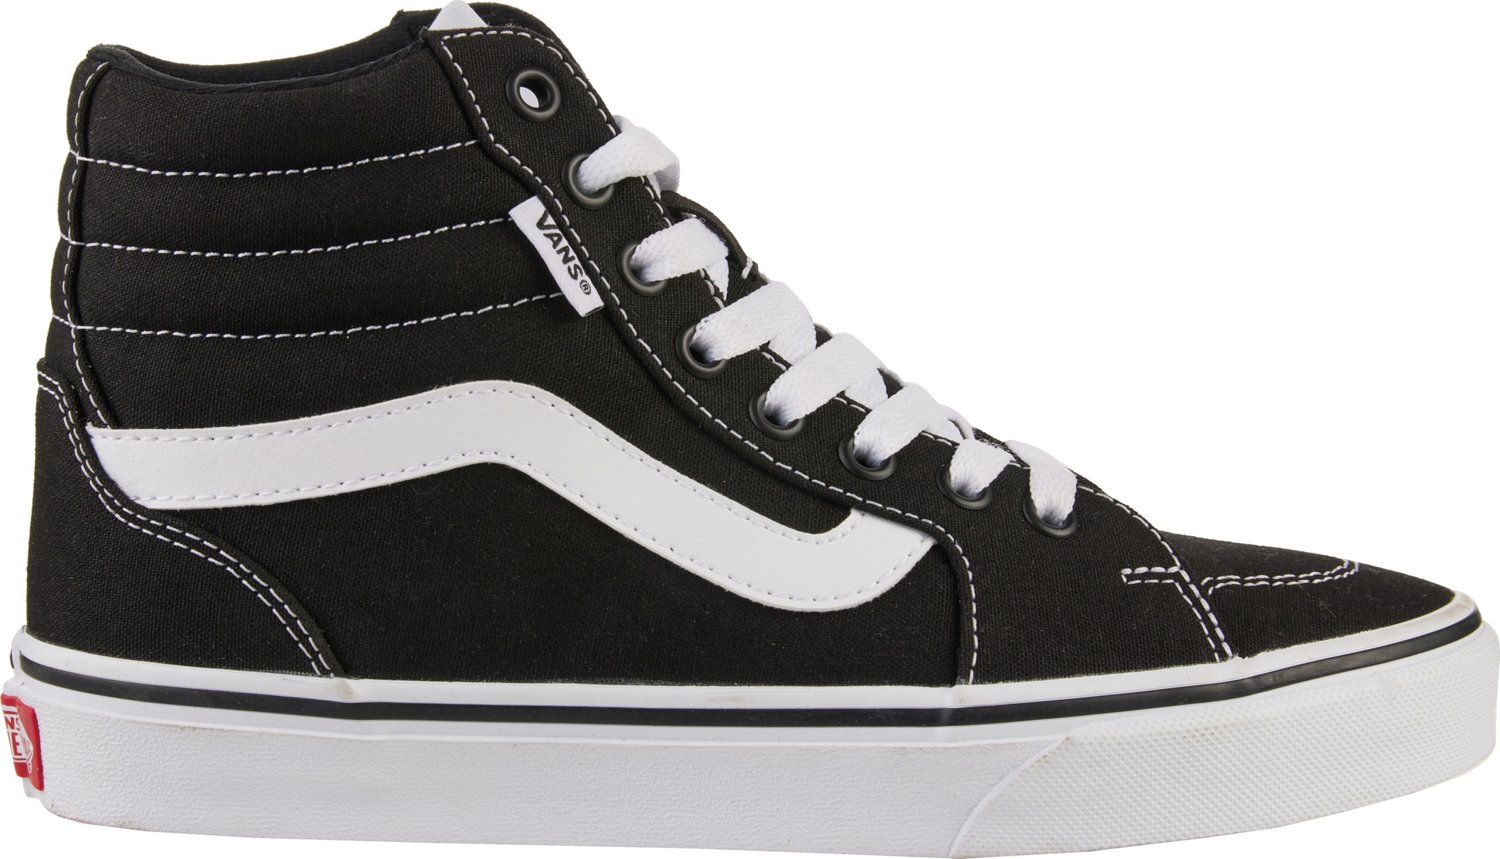 Vans Women's Filmore High-Top Shoes | Free Shipping at Academy